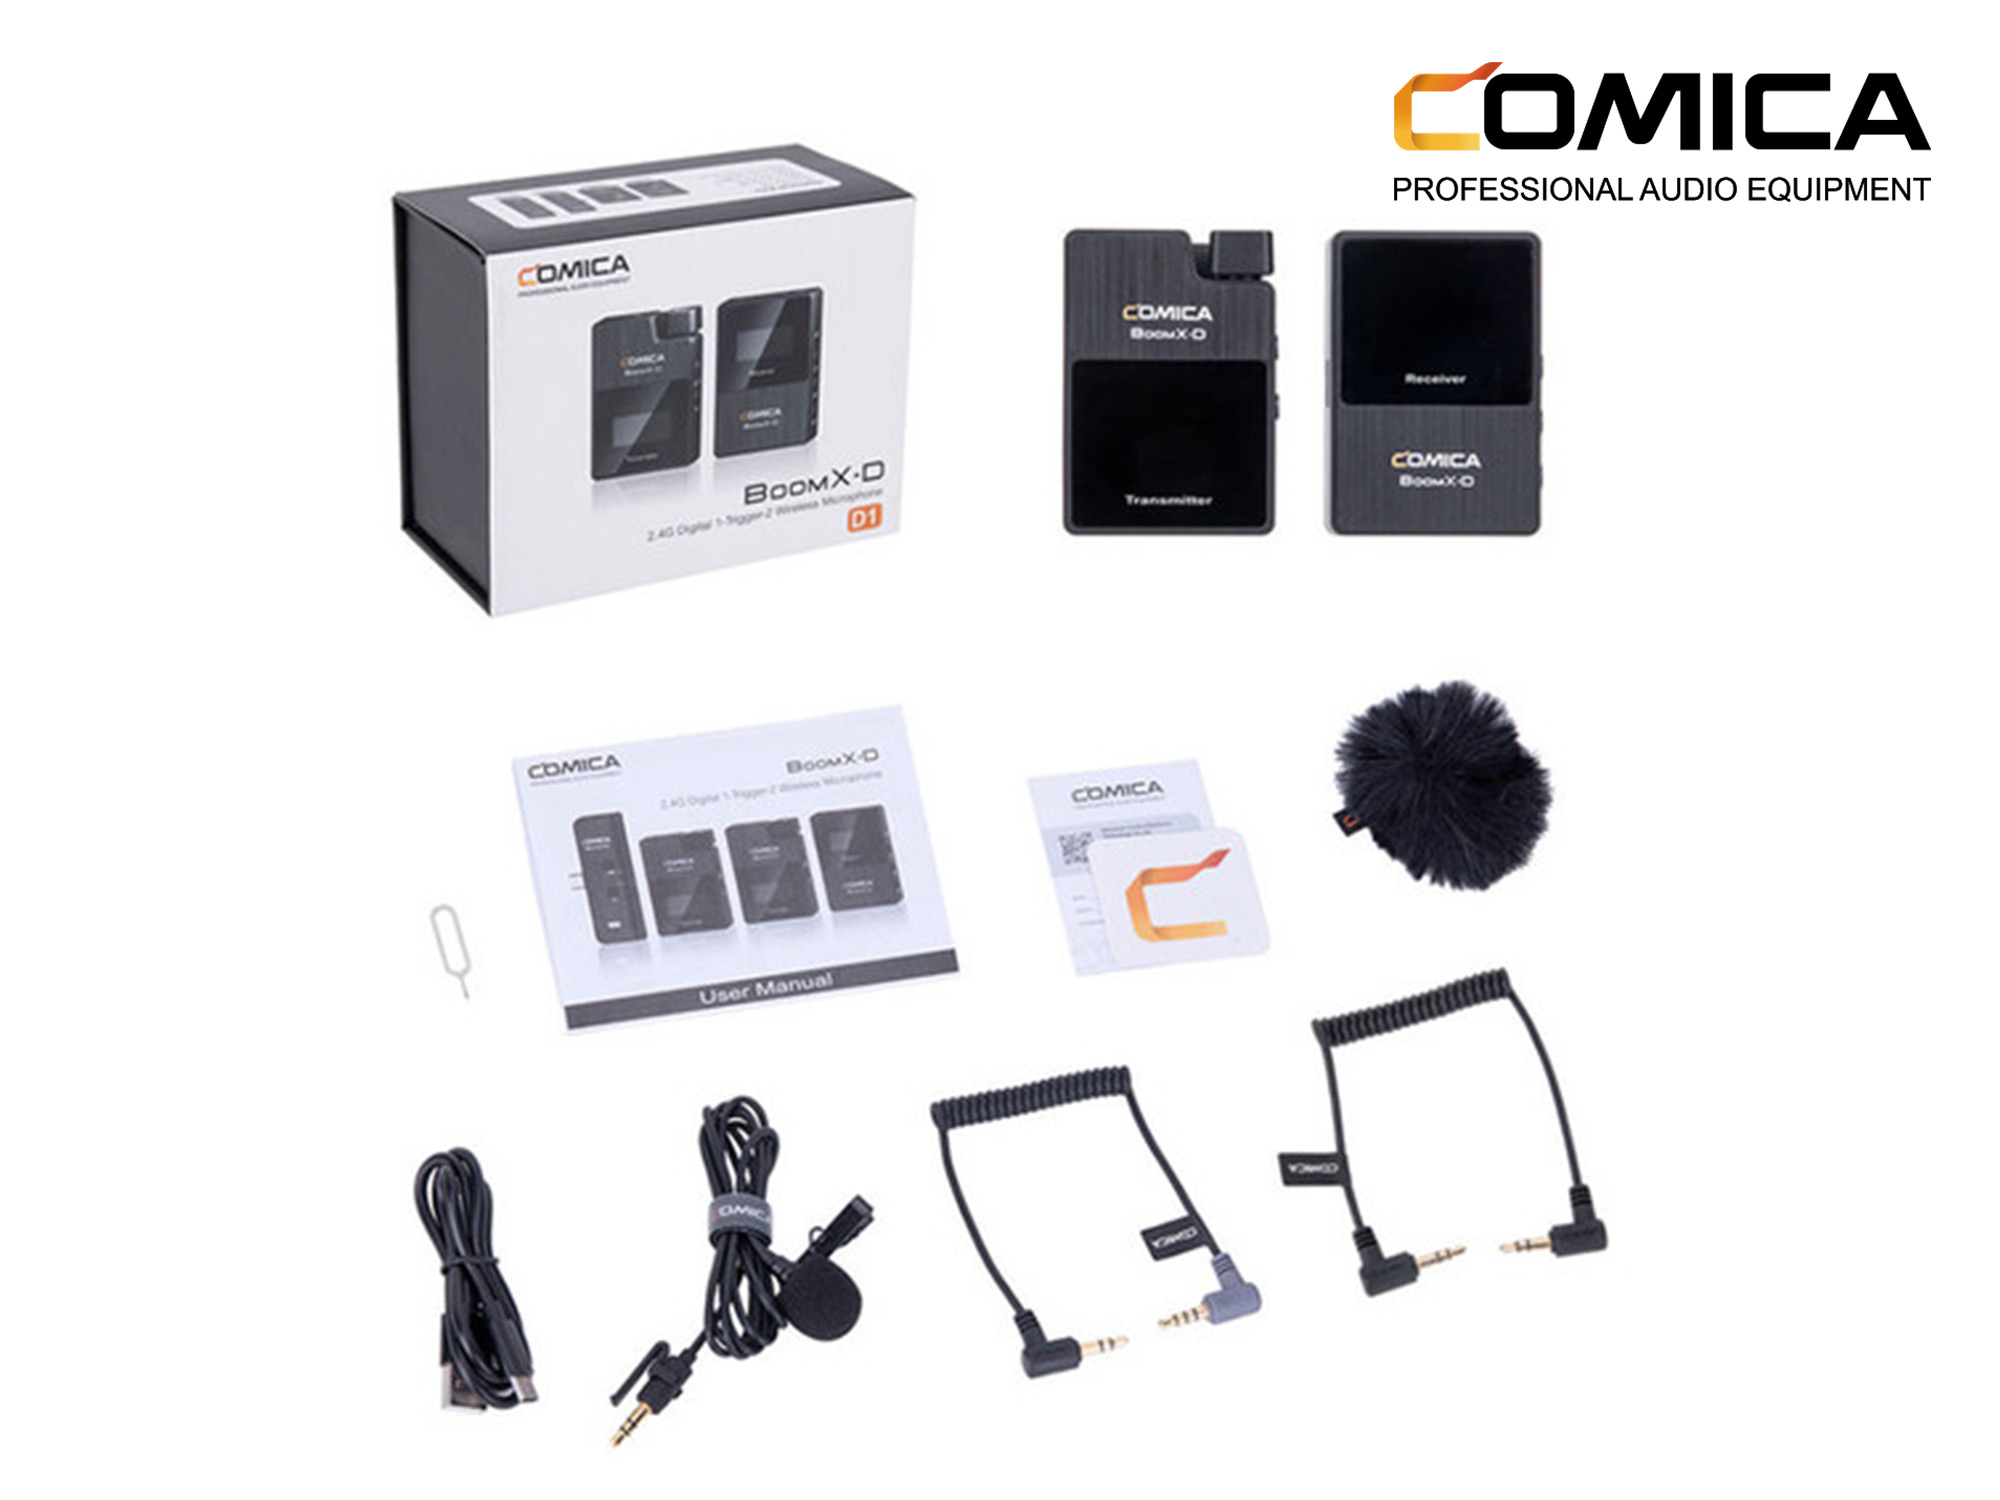 Comica BoomX-D D1 Ultracompact Digital Wireless Microphone System for Mirrorless/DSLR Cameras (2.4 GHz)